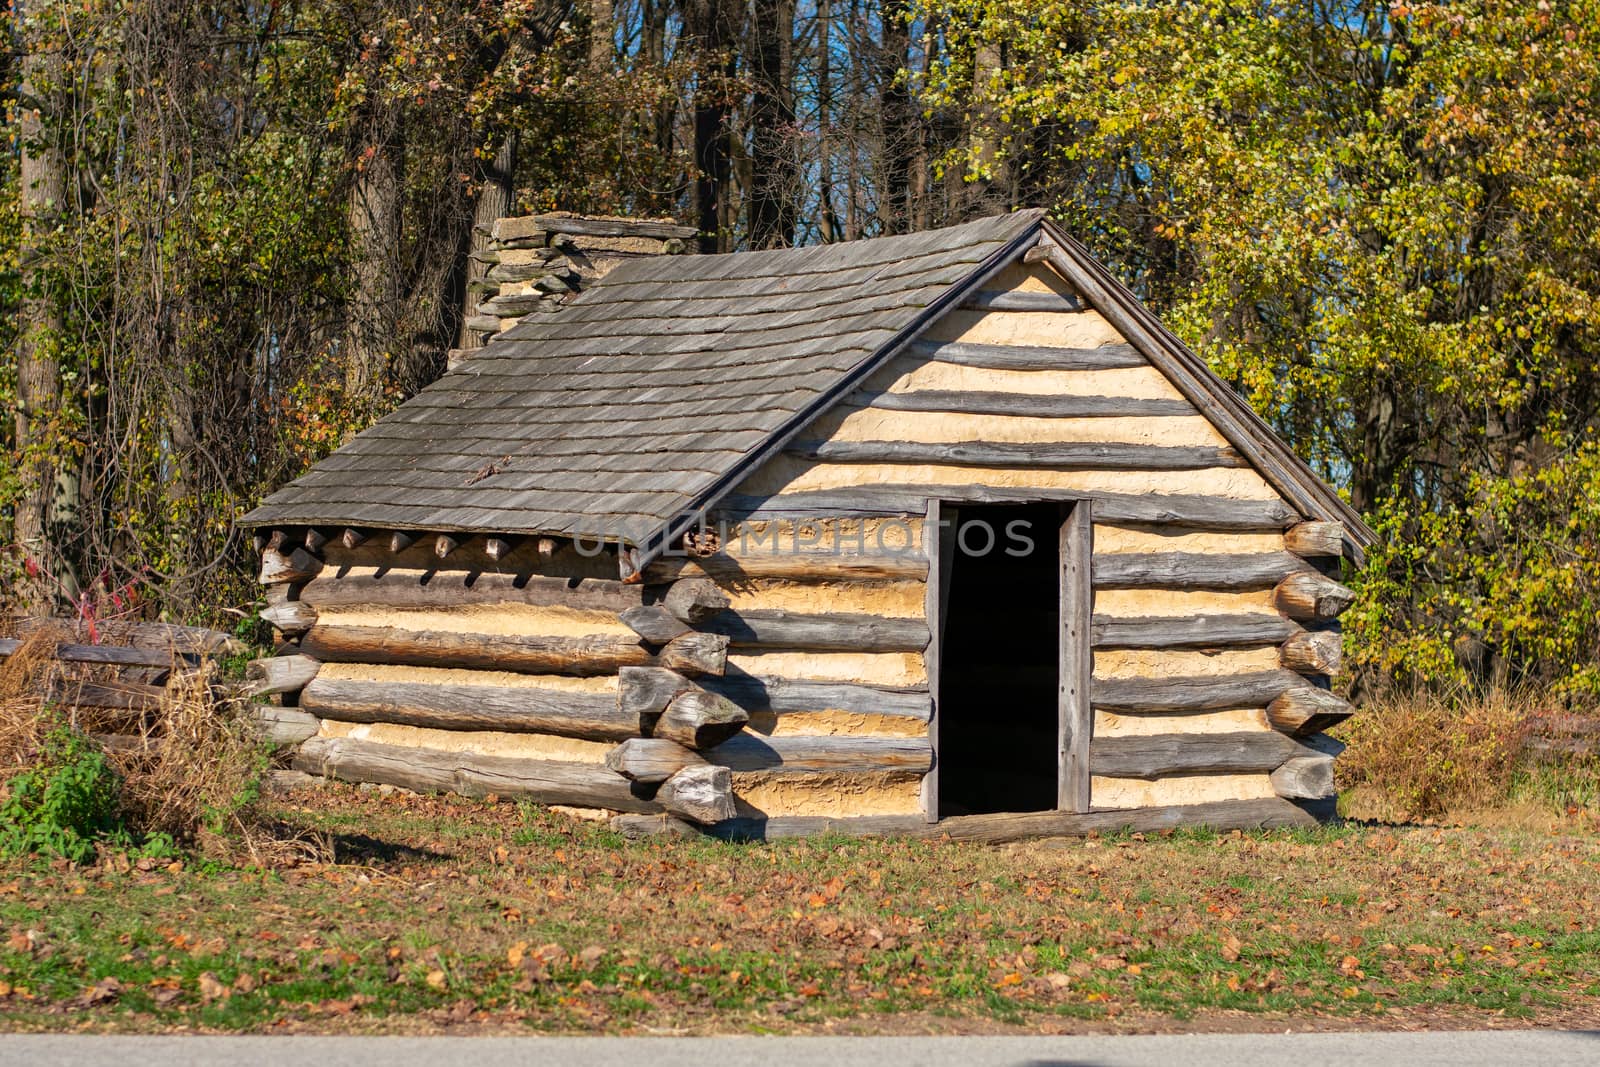 A Reproduction Log Hut at Valley Forge National Historical Park by bju12290